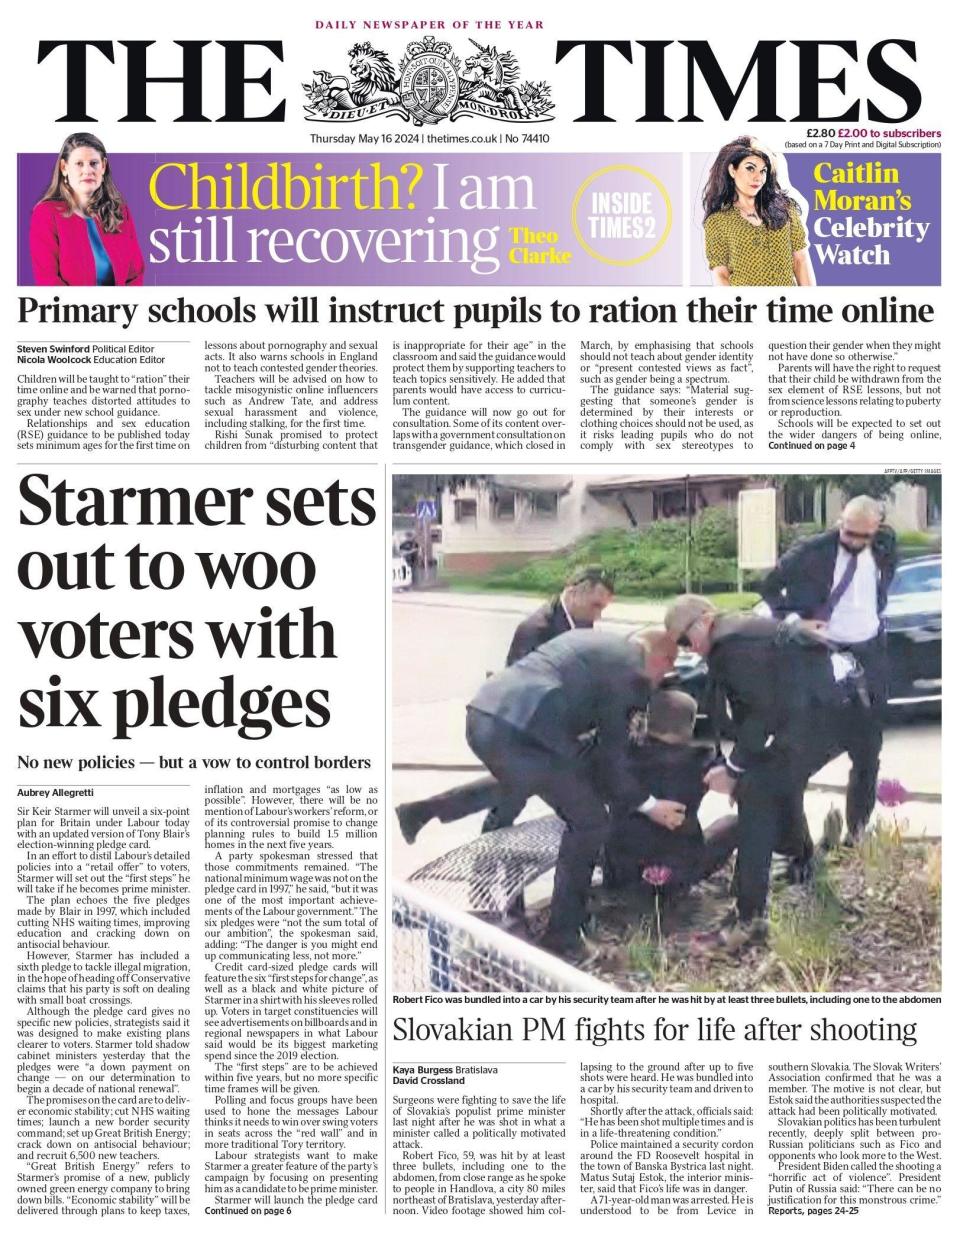 The Times: Starmer sets out to woo voters with six pledges